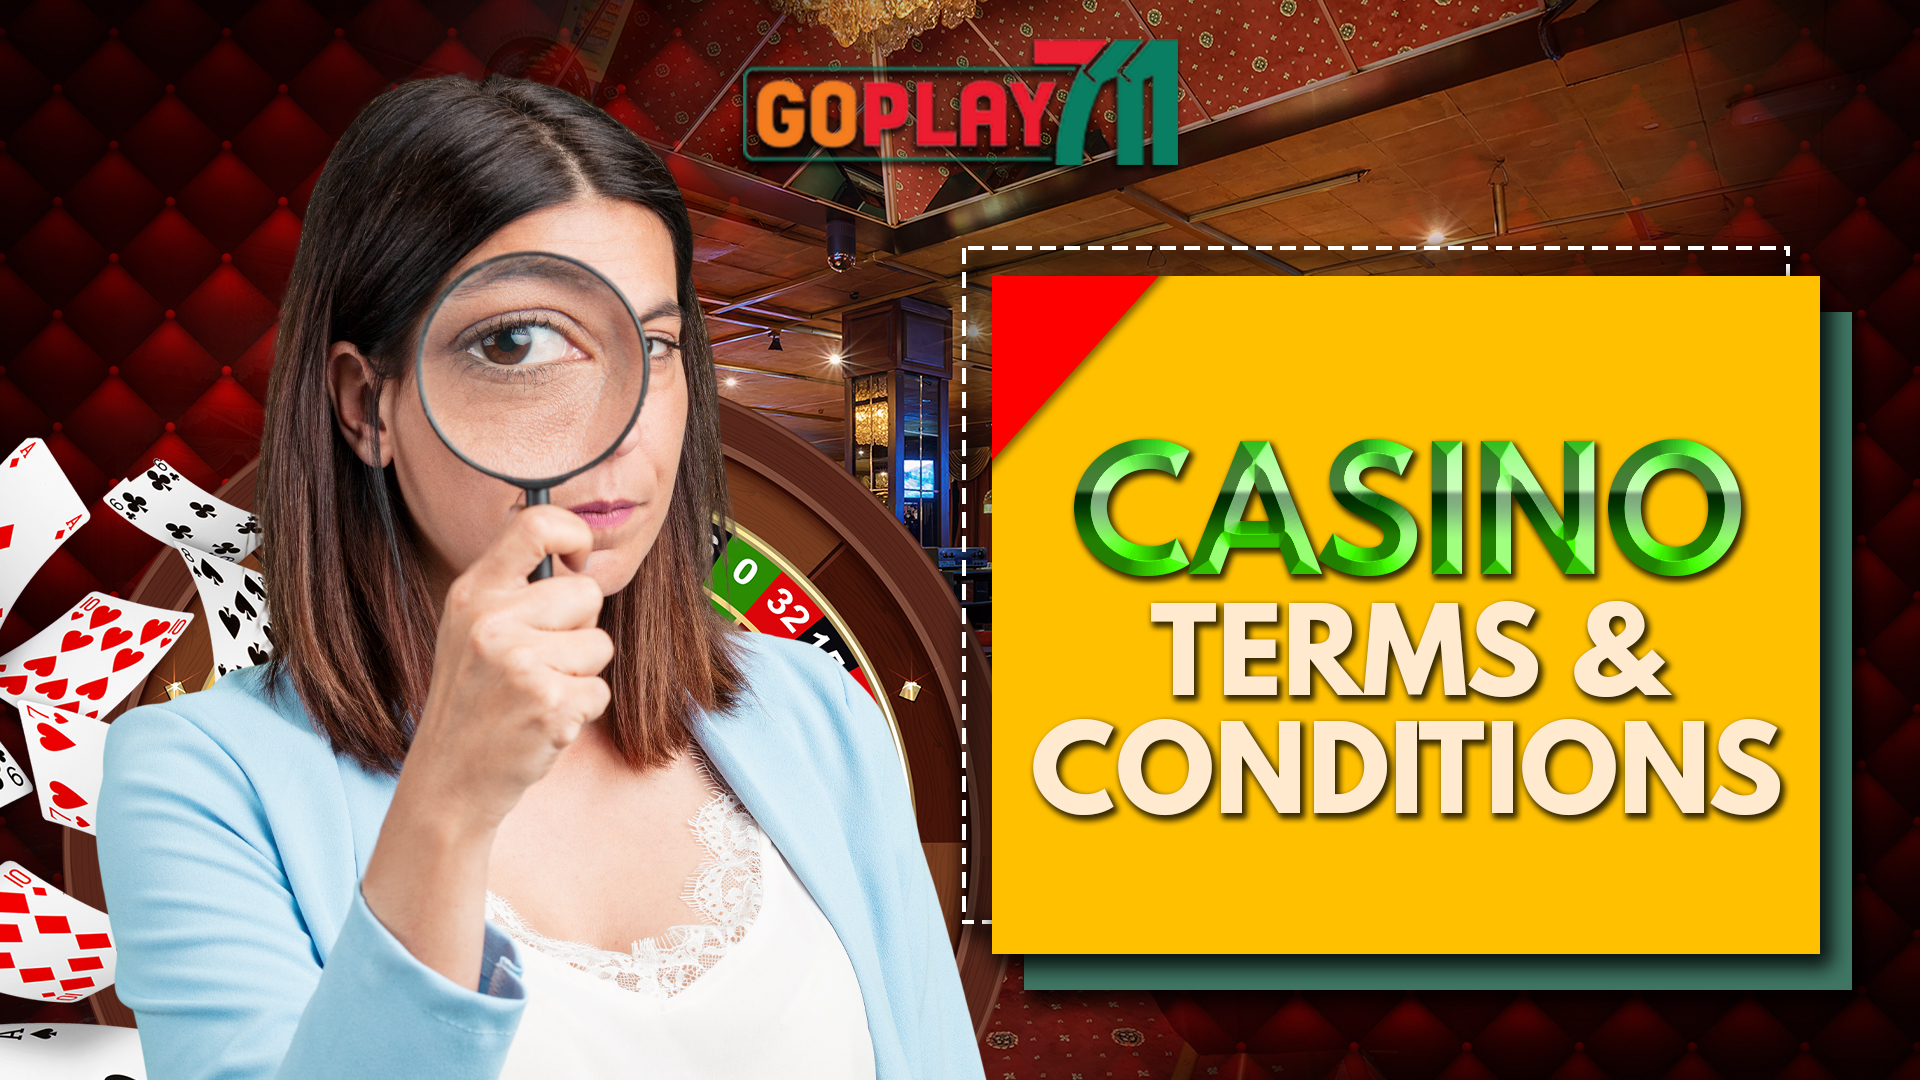 UNDERSTANDING THE CASINO BONUS TERMS AND CONDITIONS